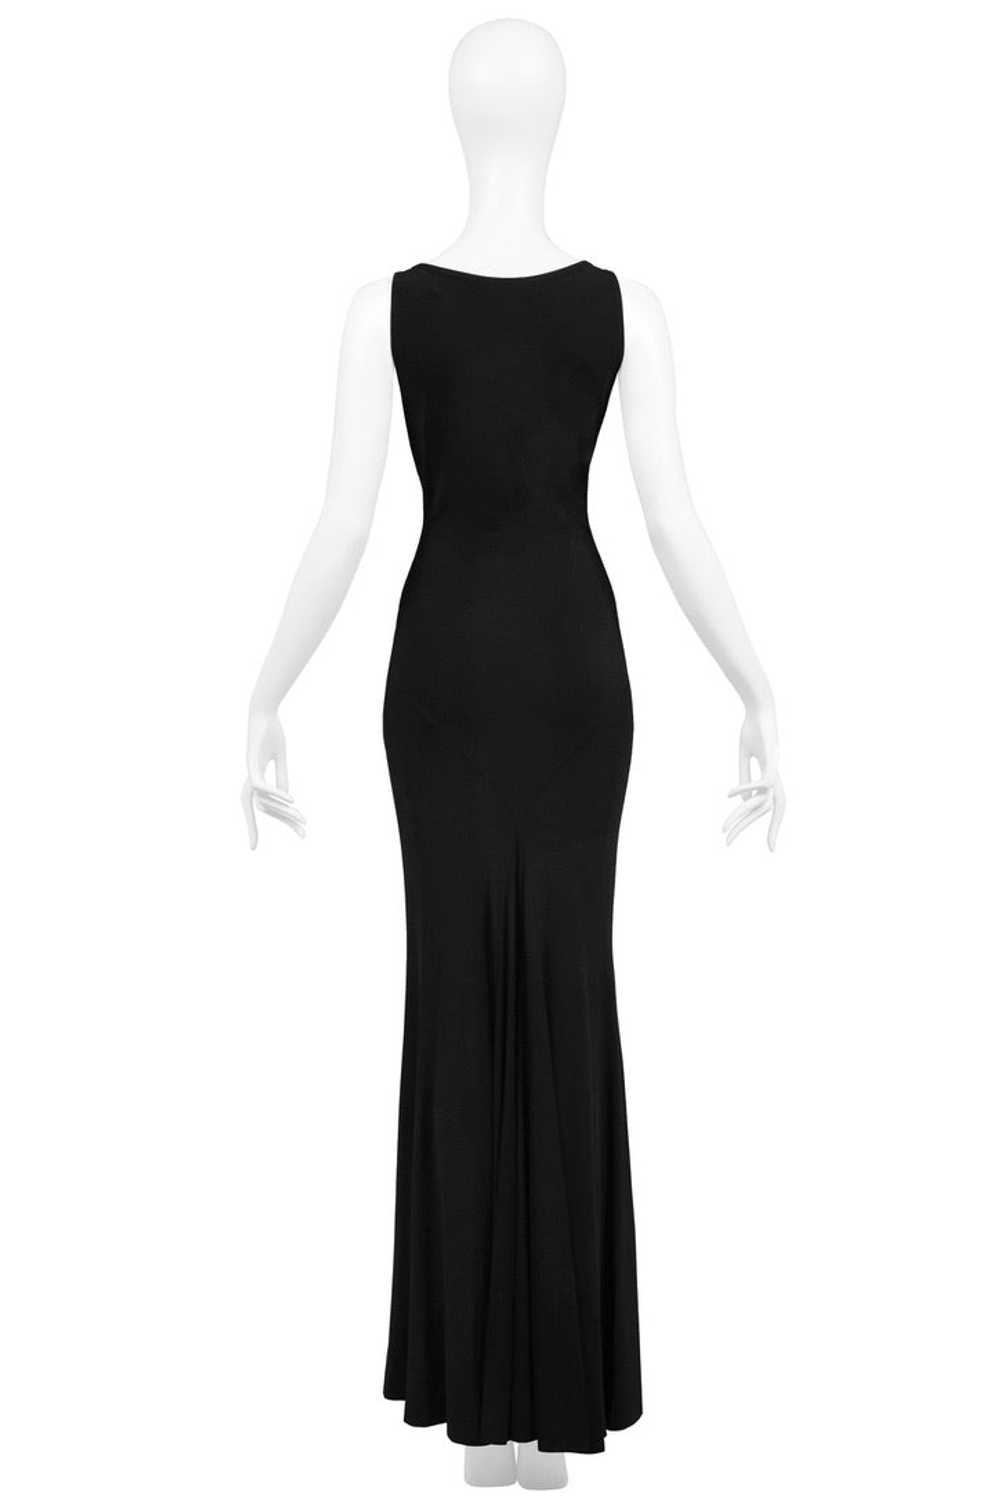 ROBERTO CAVALLI BLACK JERSEY EVENING GOWN WITH GO… - image 4